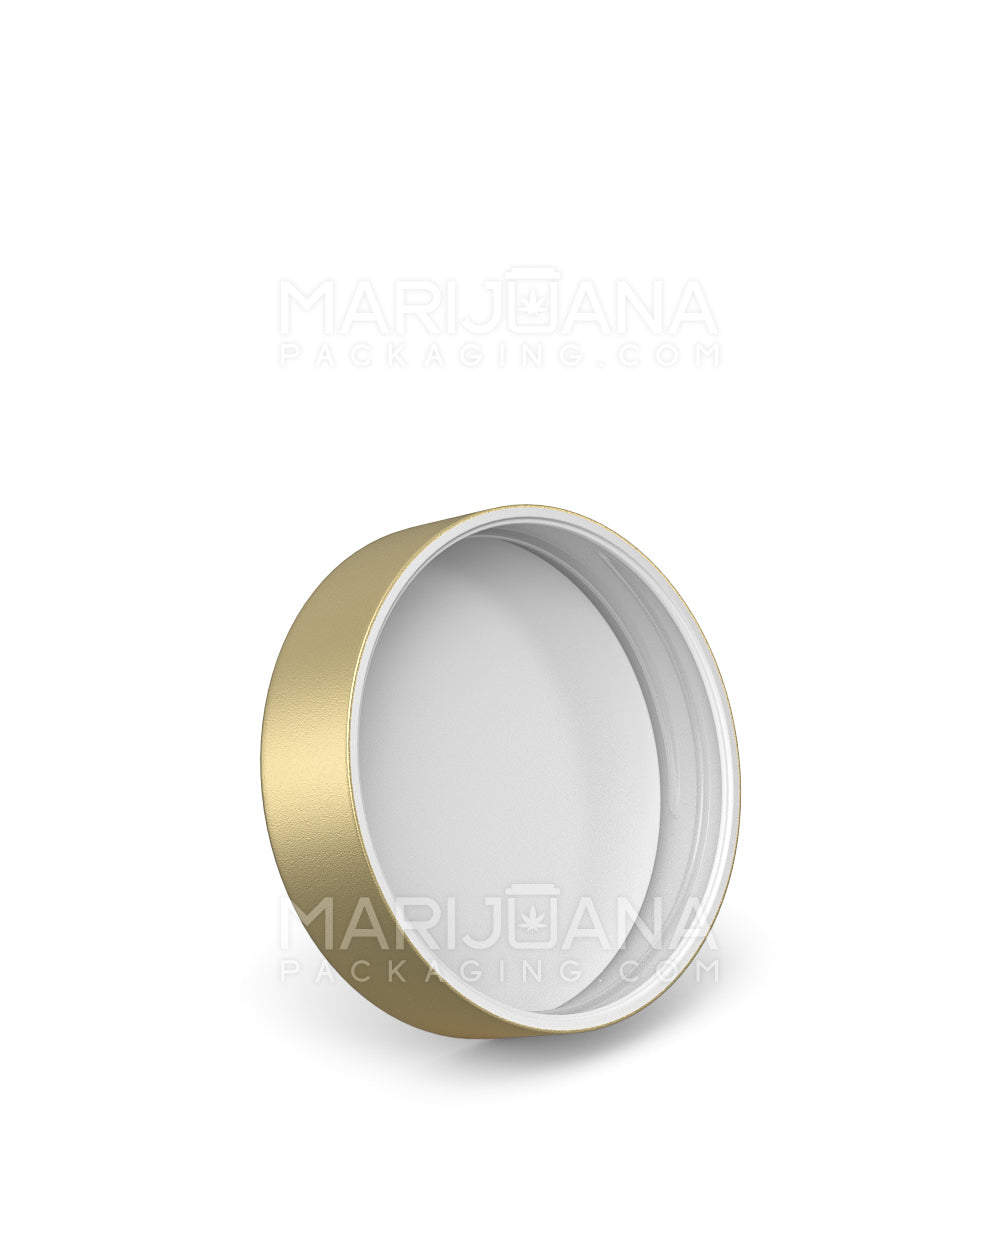 Child Resistant | Smooth Flat Push Down & Turn Plastic Caps w/ Foam Liner | 50mm - Matte Gold - 100 Count - 2